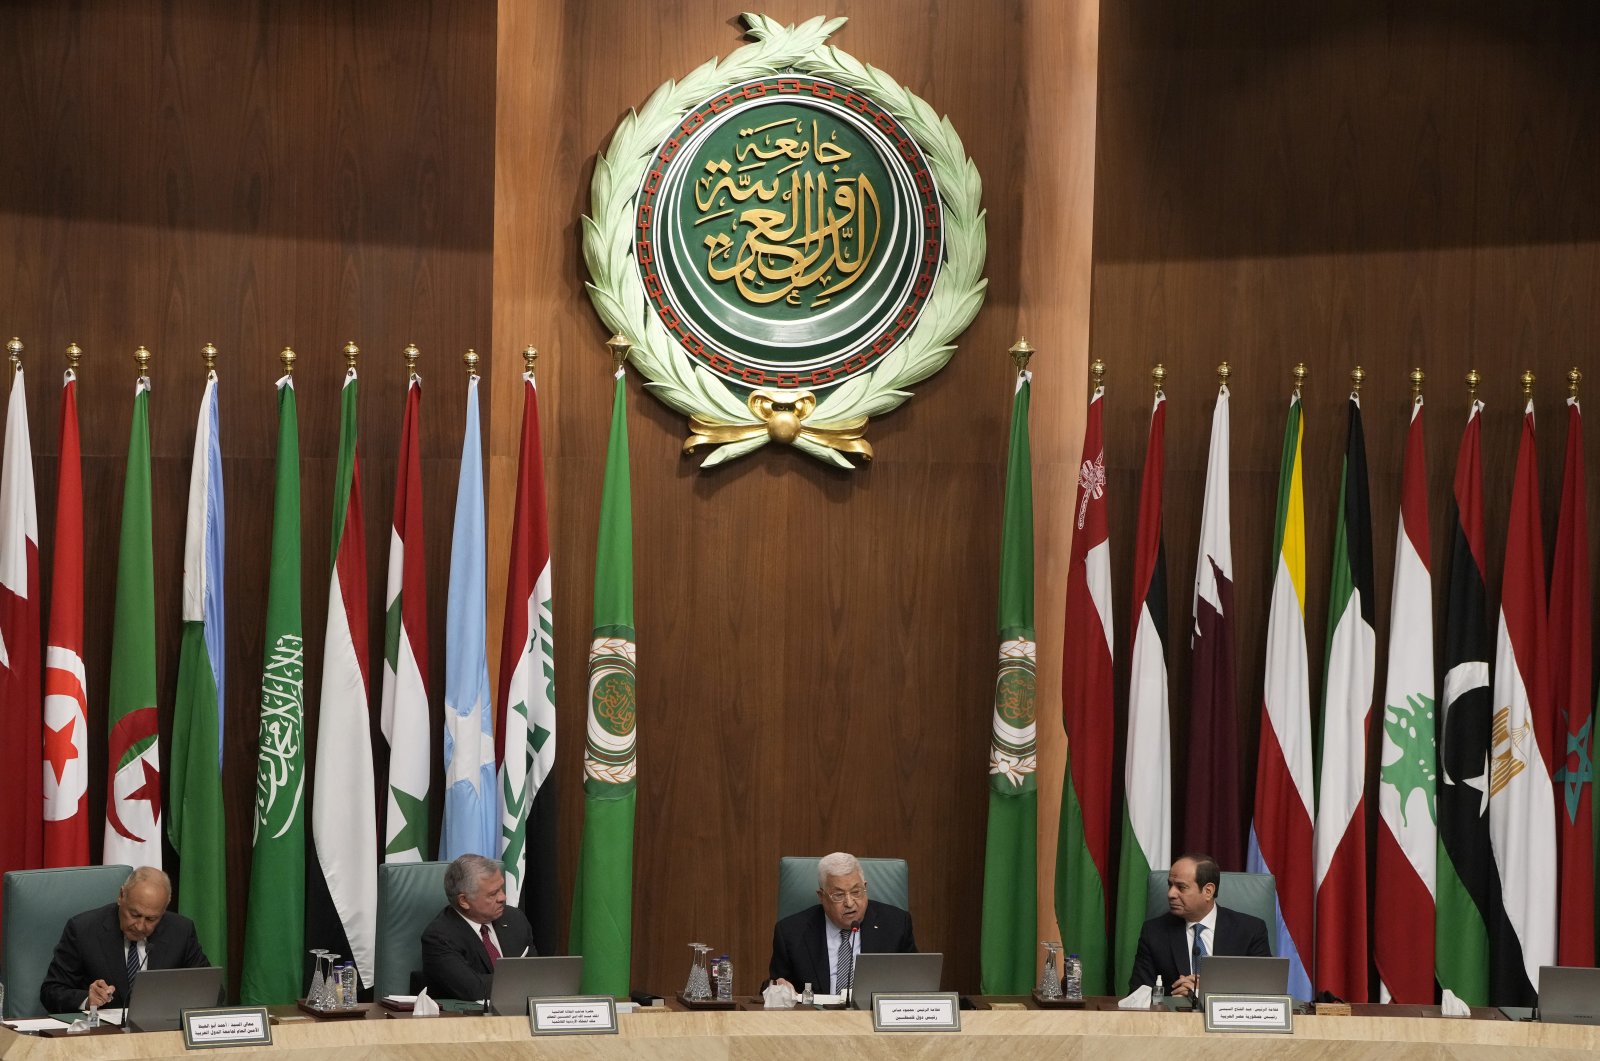 From right to left, Egyptian President Abdel-Fattah el-Sissi, Palestinian President Mahmoud Abbas, King Abdullah II of Jordan, and Arab League Secretary-General, Ahmed Aboul Gheit, attend a conference to support Jerusalem at the Arab League headquarters in Cairo, Egypt, Feb. 12, 2023. (AP File Photo)